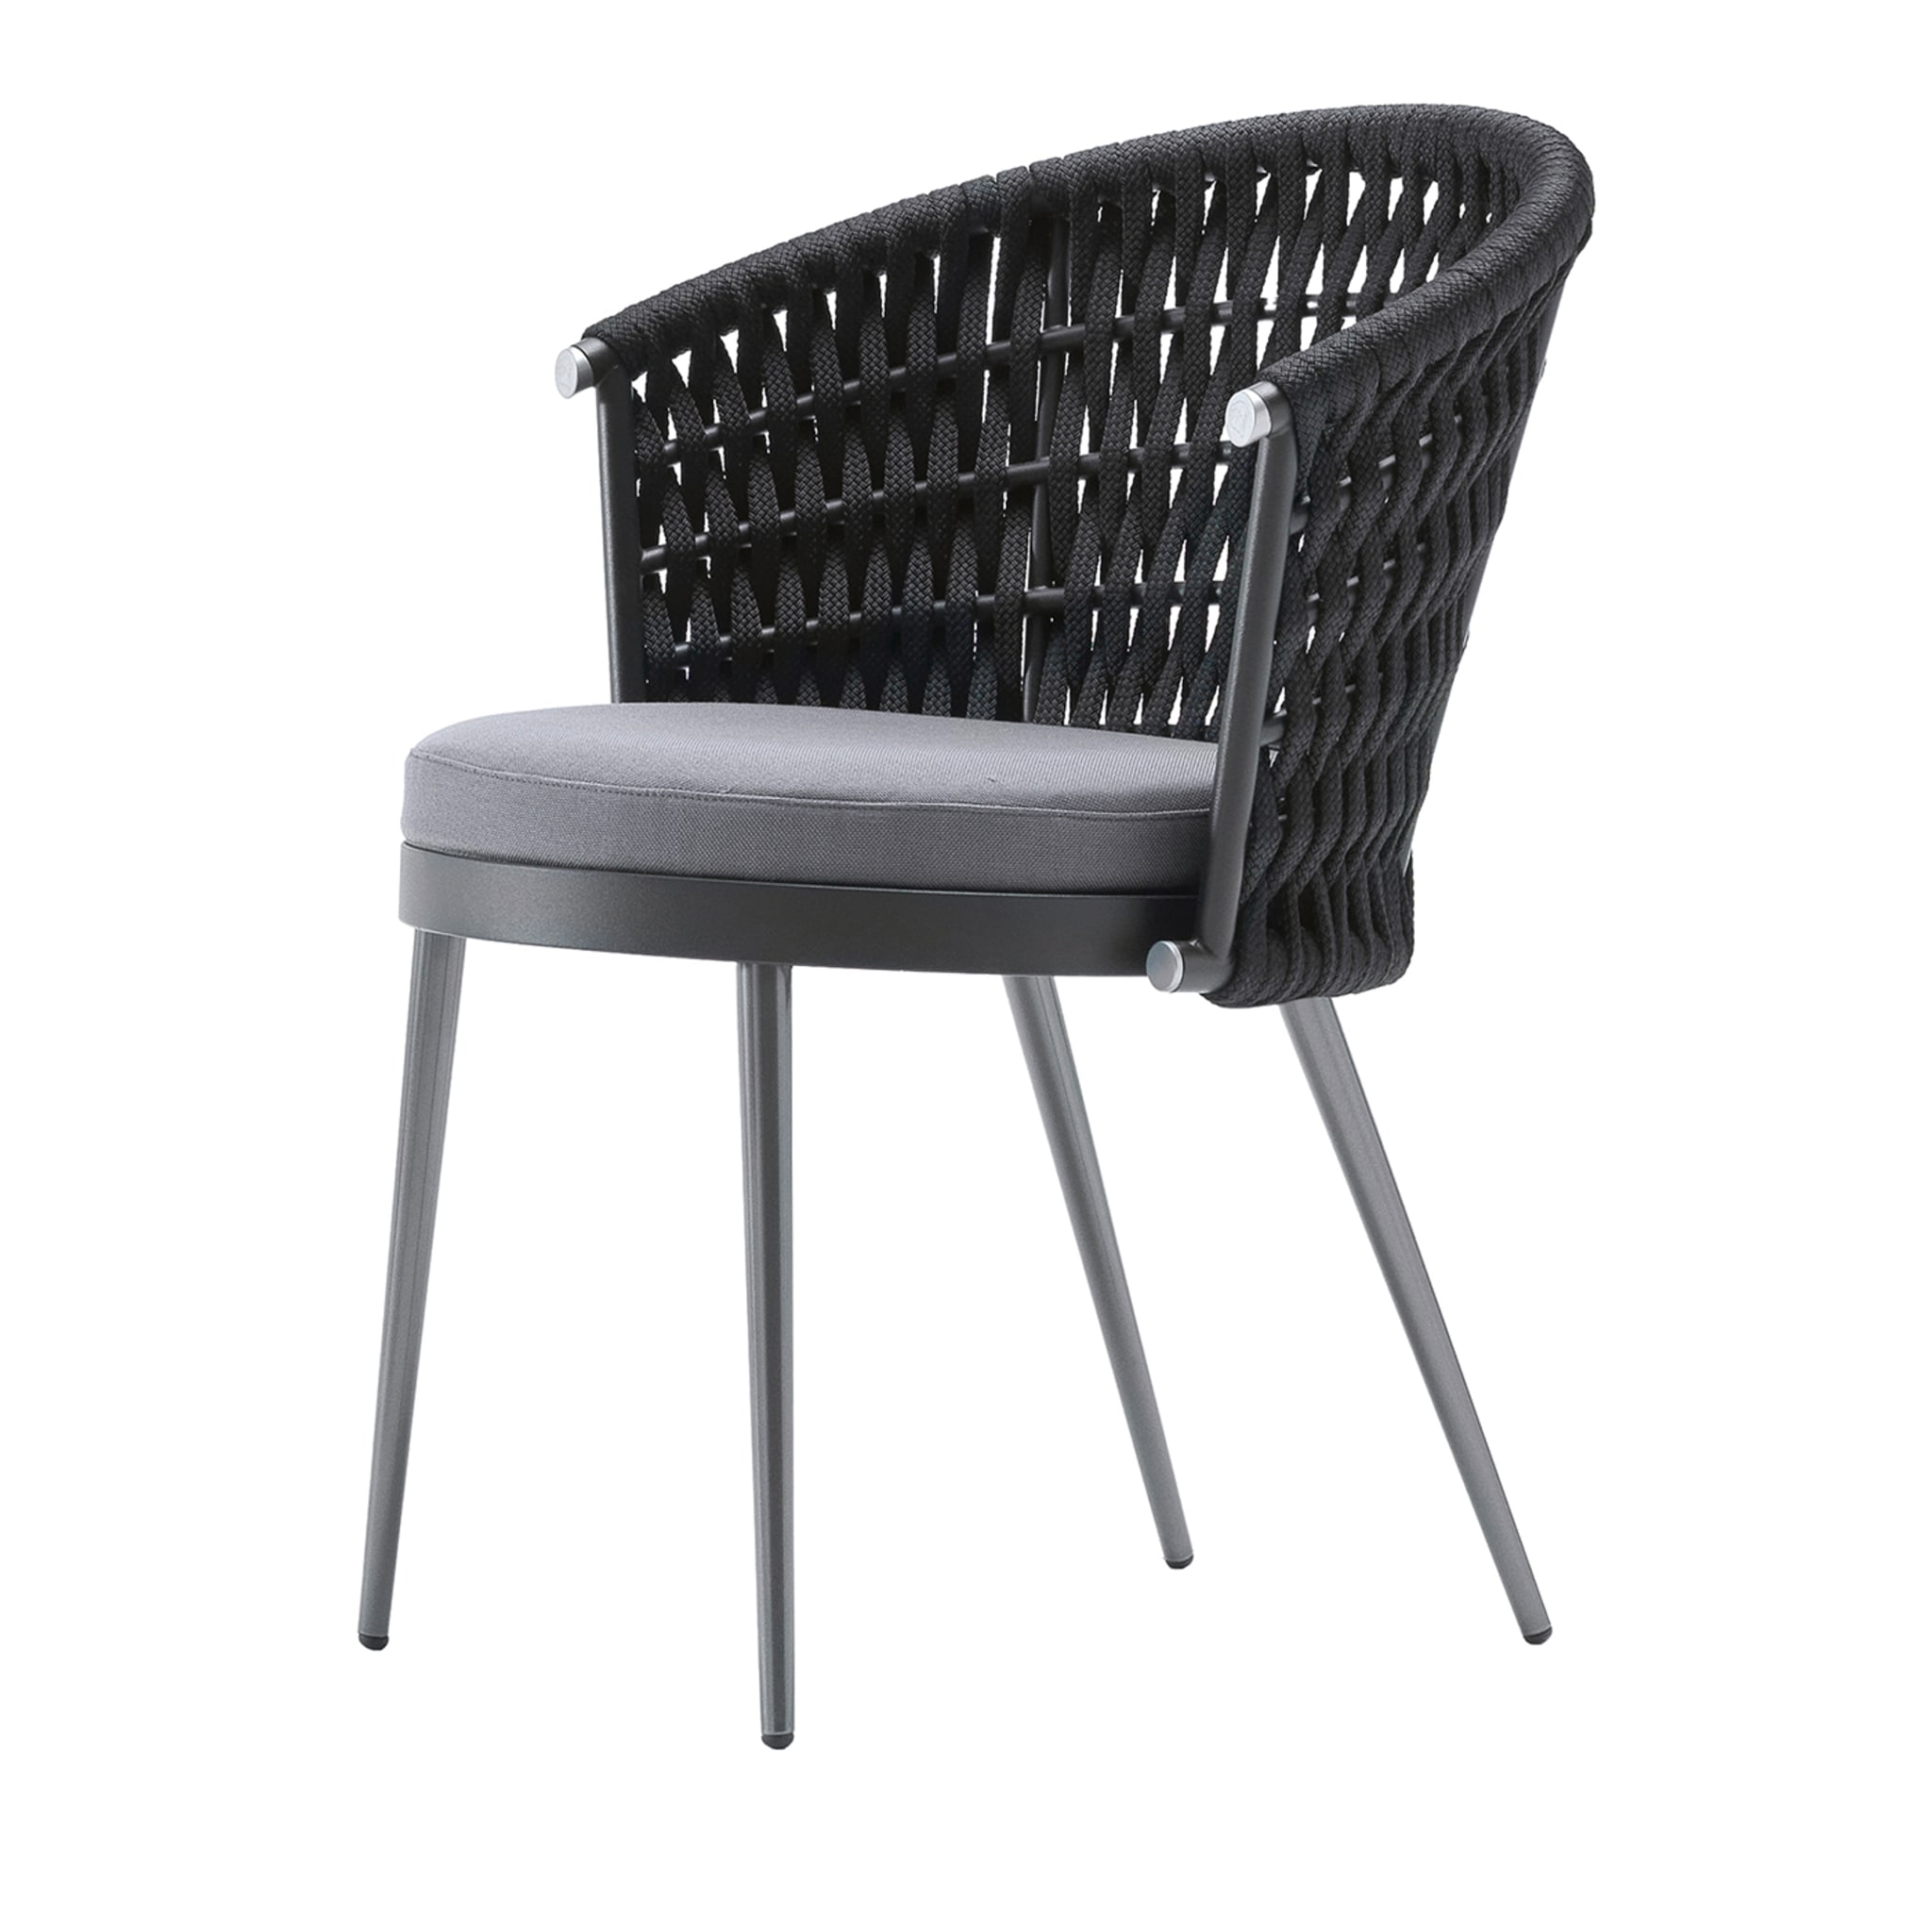 Black Outdoor fabric Chair - Main view